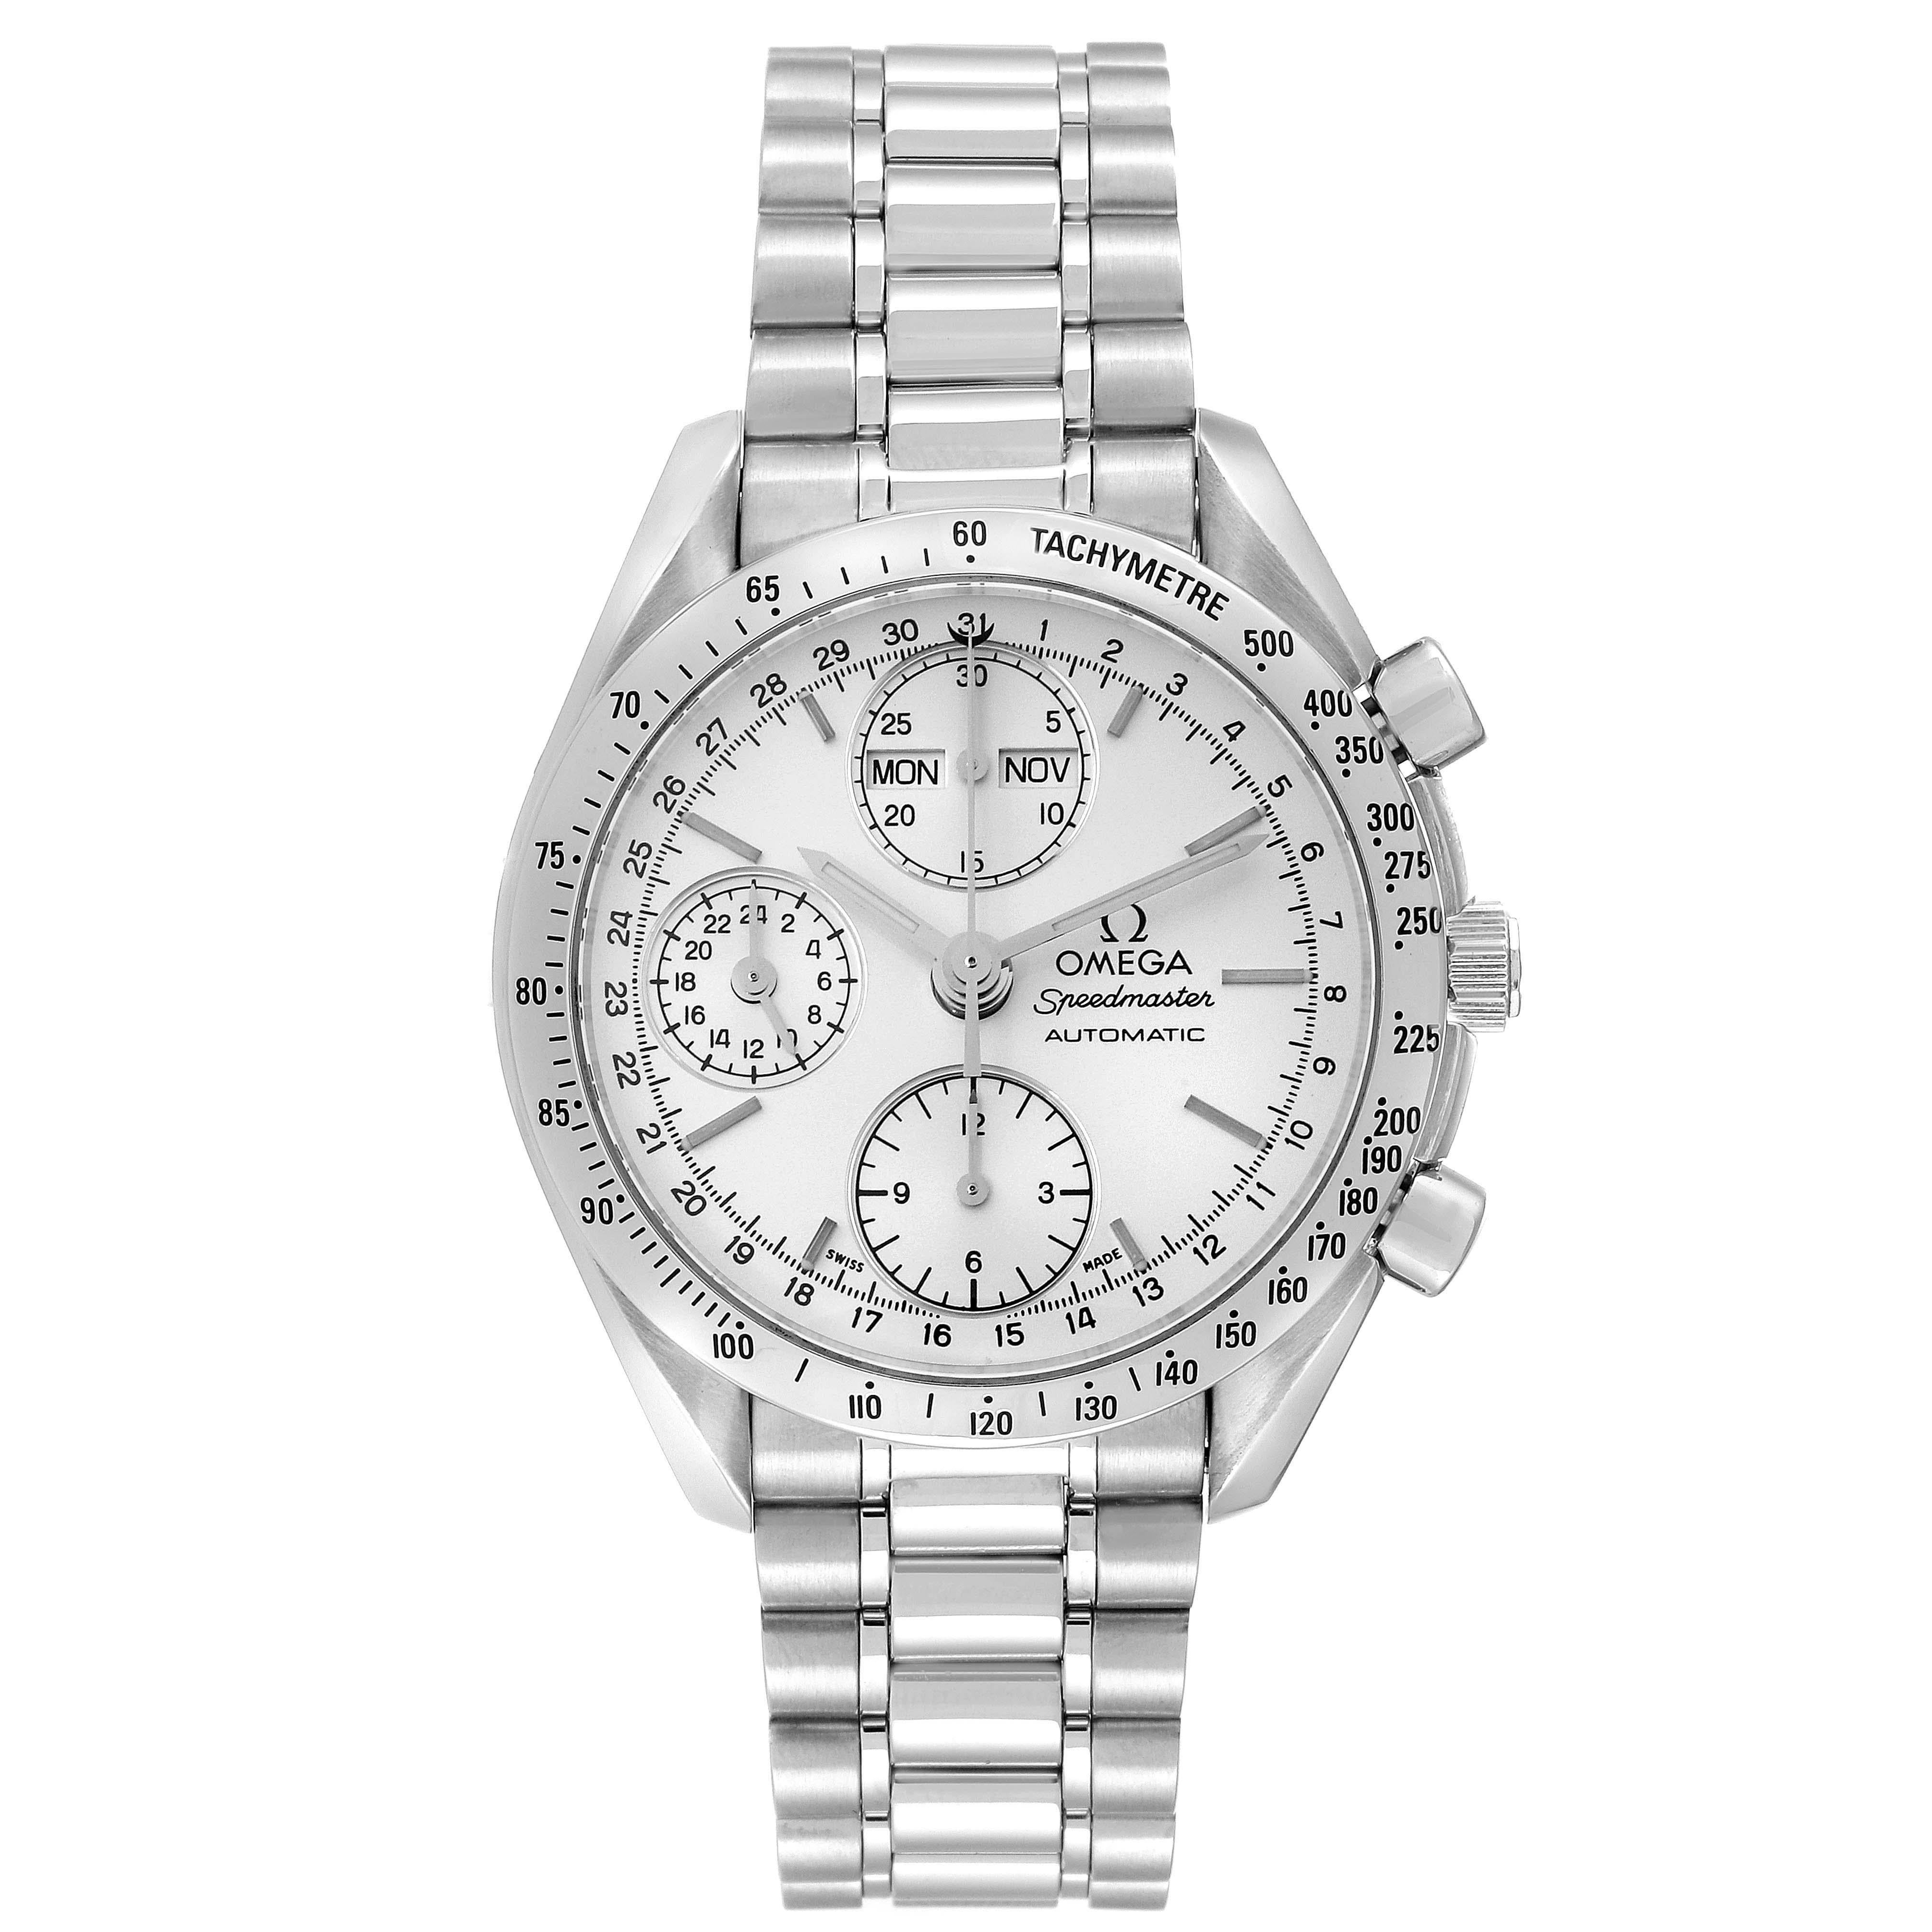 Omega Speedmaster Day Date Chronograph Steel Mens Watch 3521.30.00 Card. Automatic self-winding chronograph movement. Day, date, and month indications. Stainless steel round case 38.0 mm in diameter. Stainless steel bezel with tachymeter scale.